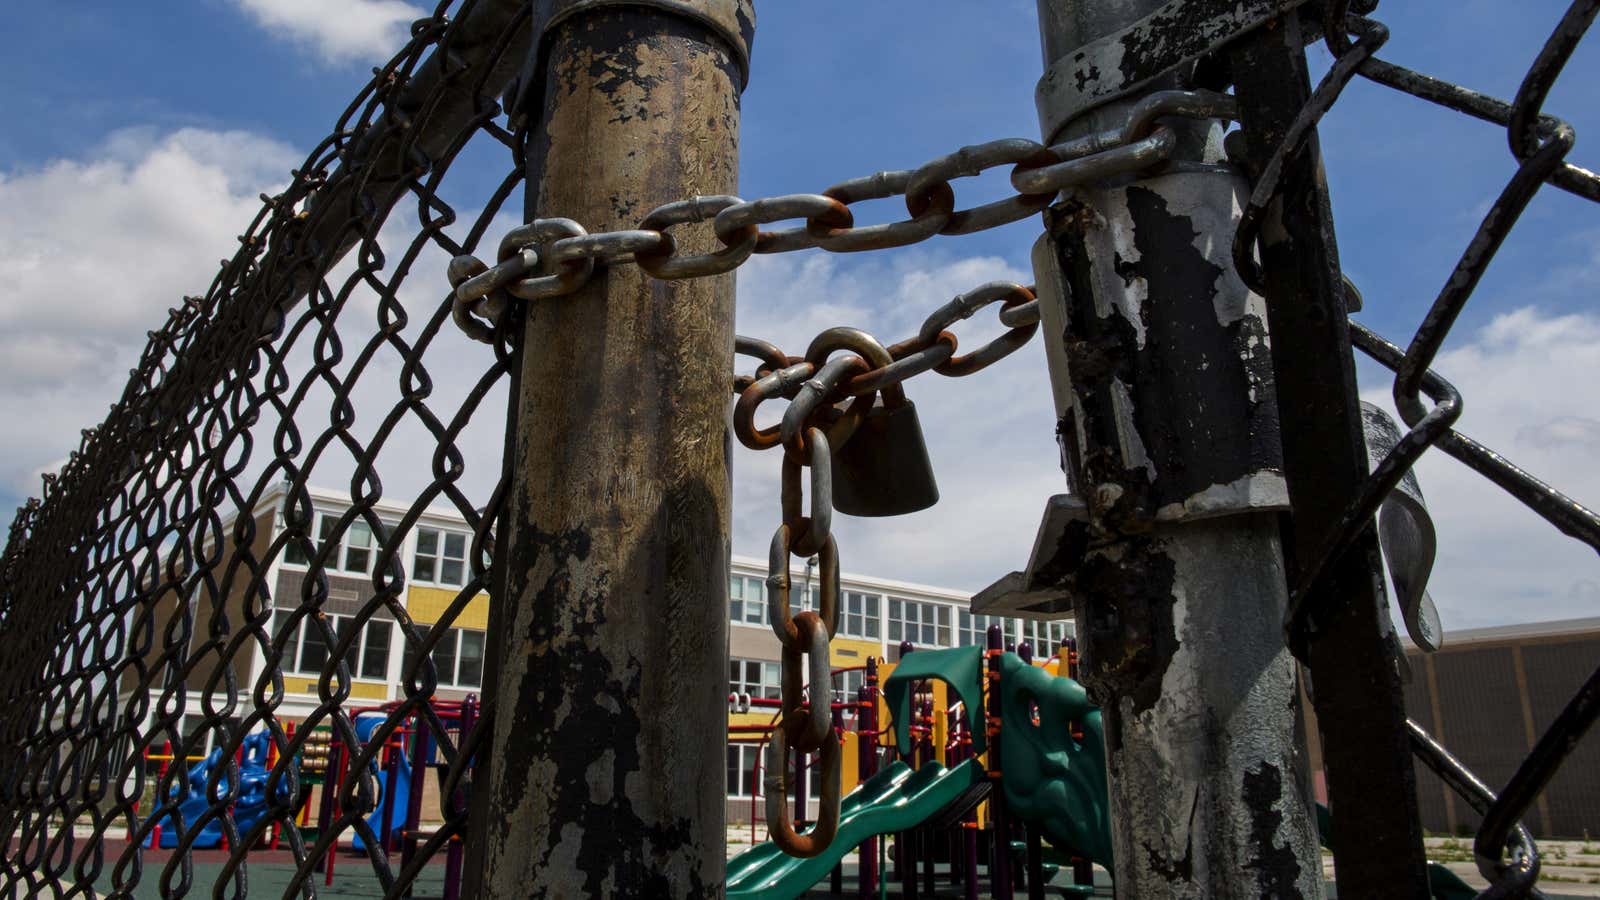 Banning ex-offenders from living near playgrounds may be backfiring.